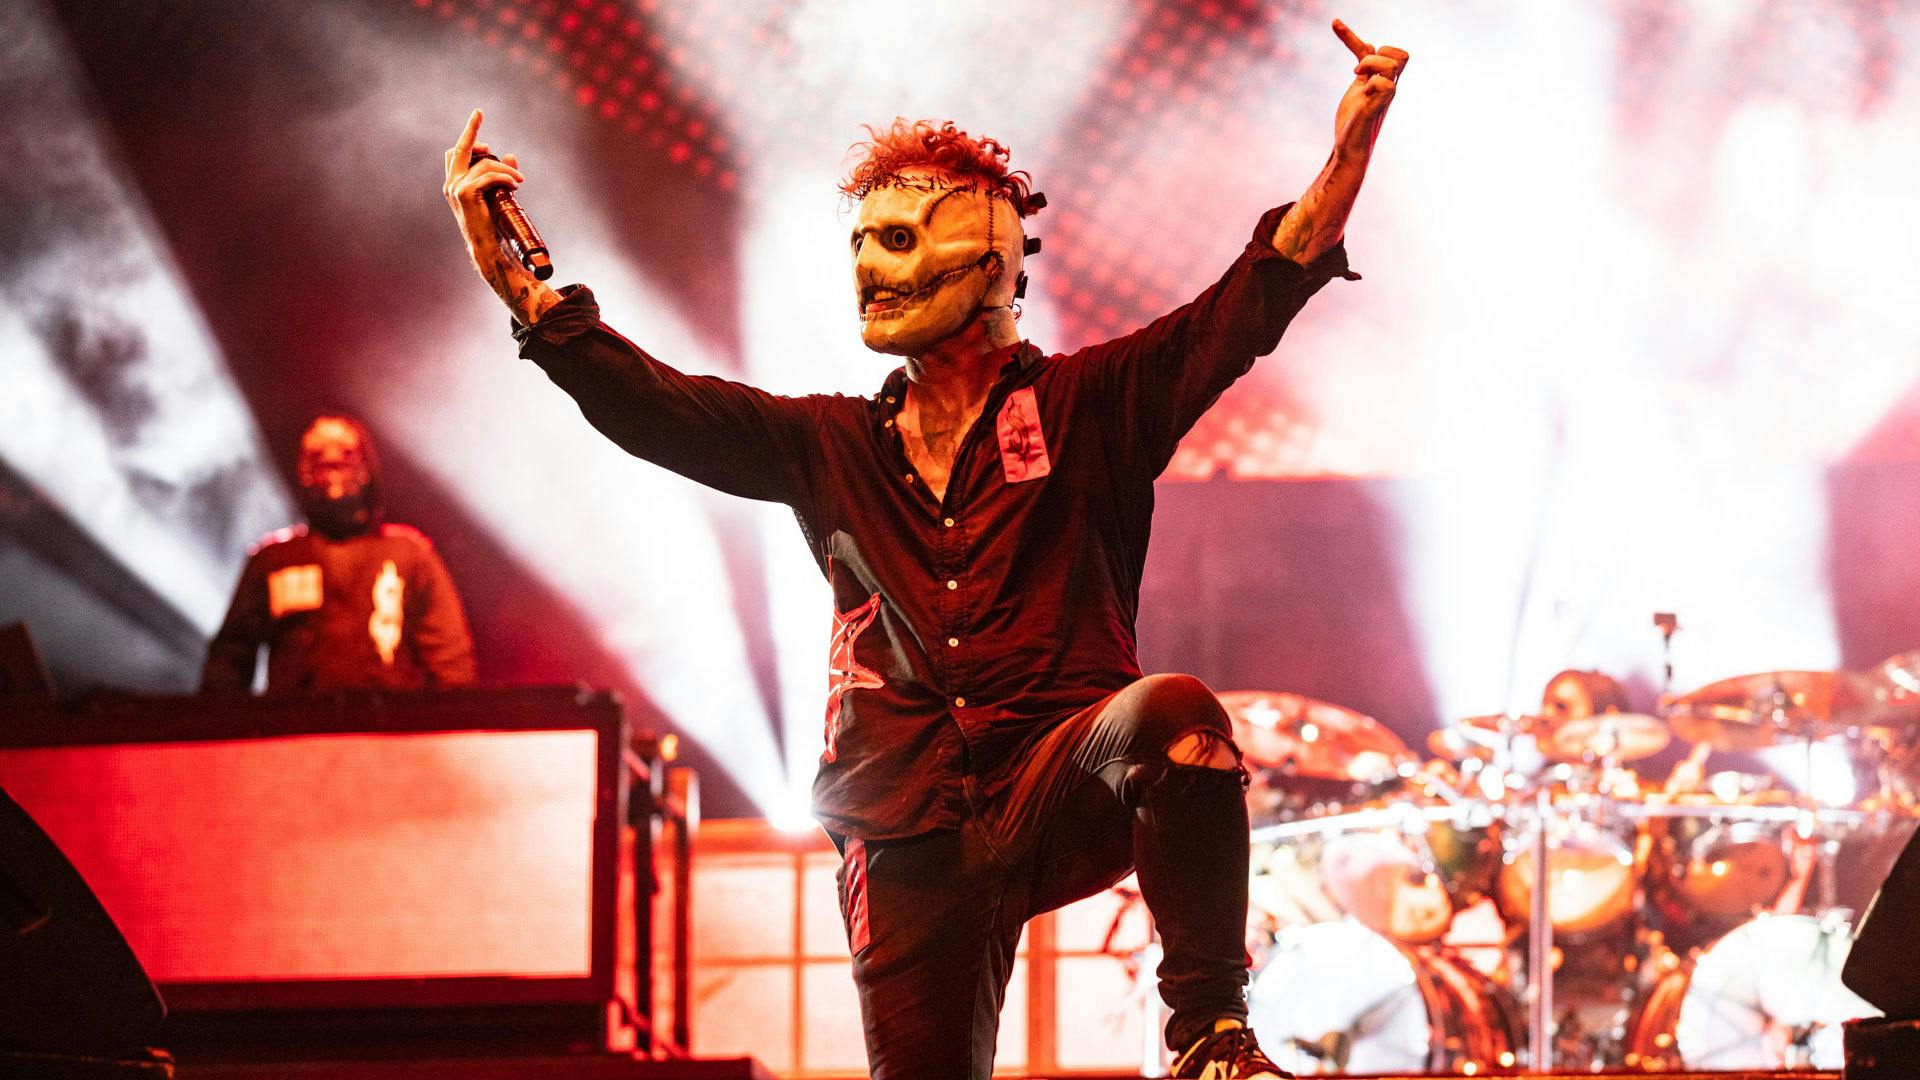 “Stop letting him troll you”: Corey Taylor shuts down Slipknot drummer rumours